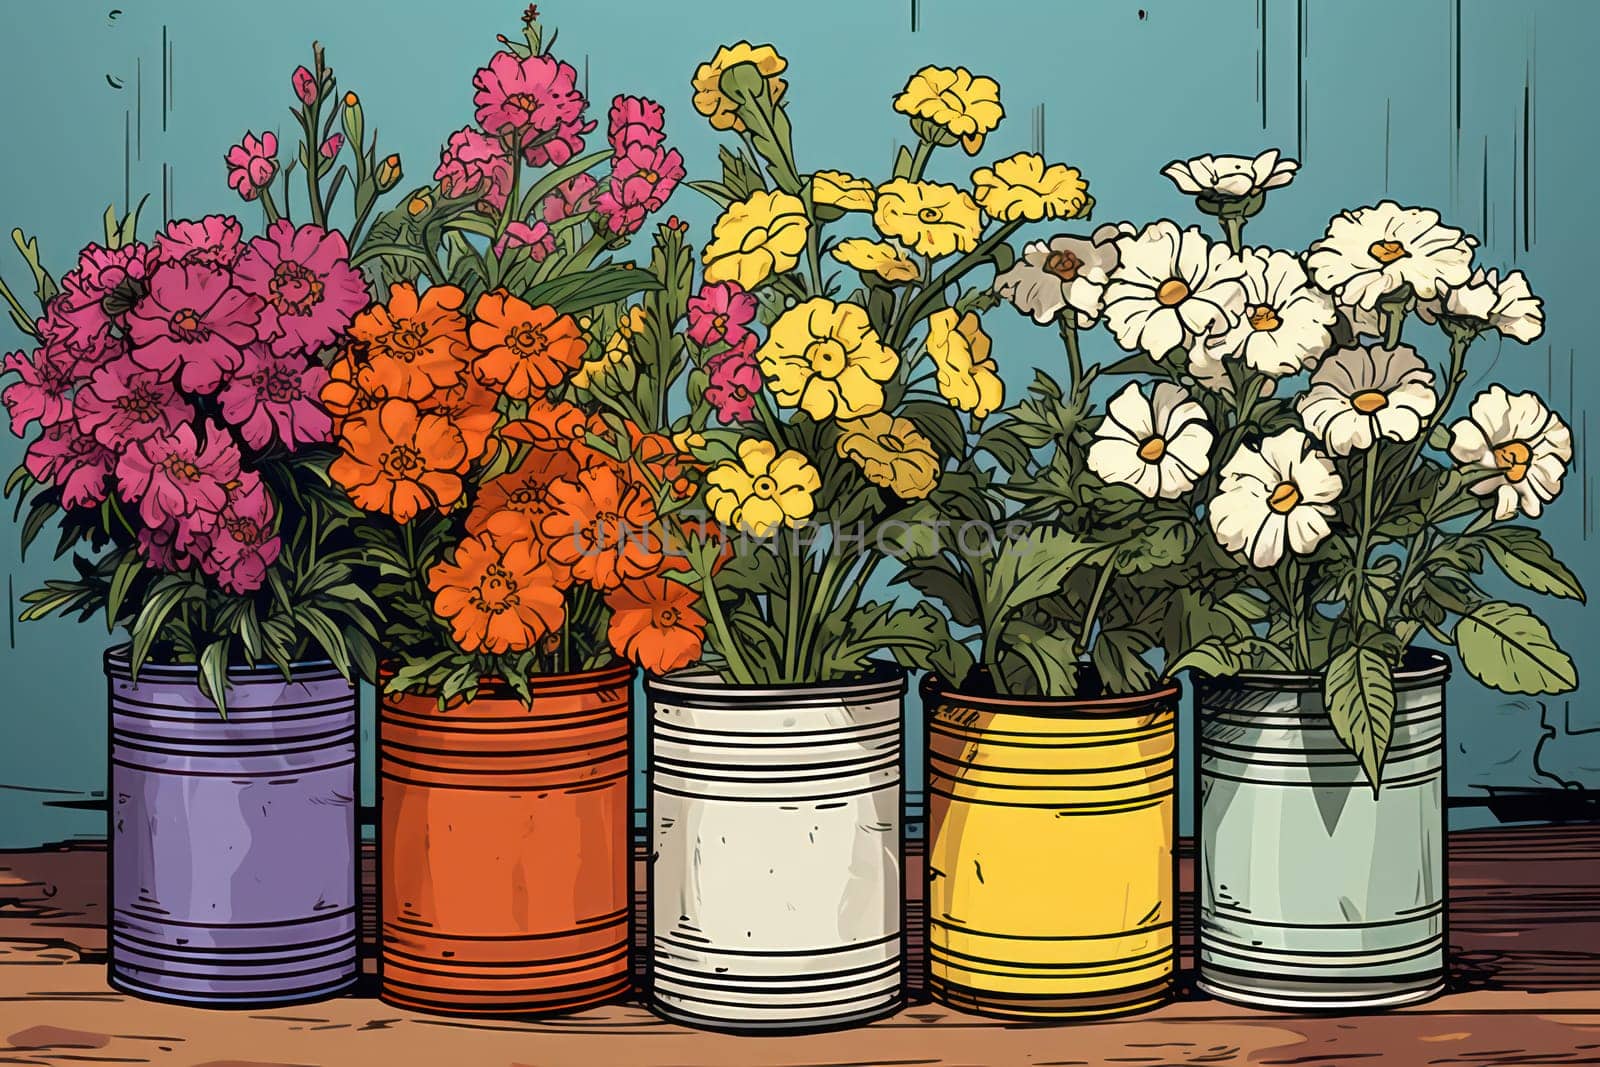 Blooming Beauty: A Colorful Floral Bouquet in a Vintage Wooden Flowerpot, Illustration on a Bright Yellow and Blue Background. by Vichizh